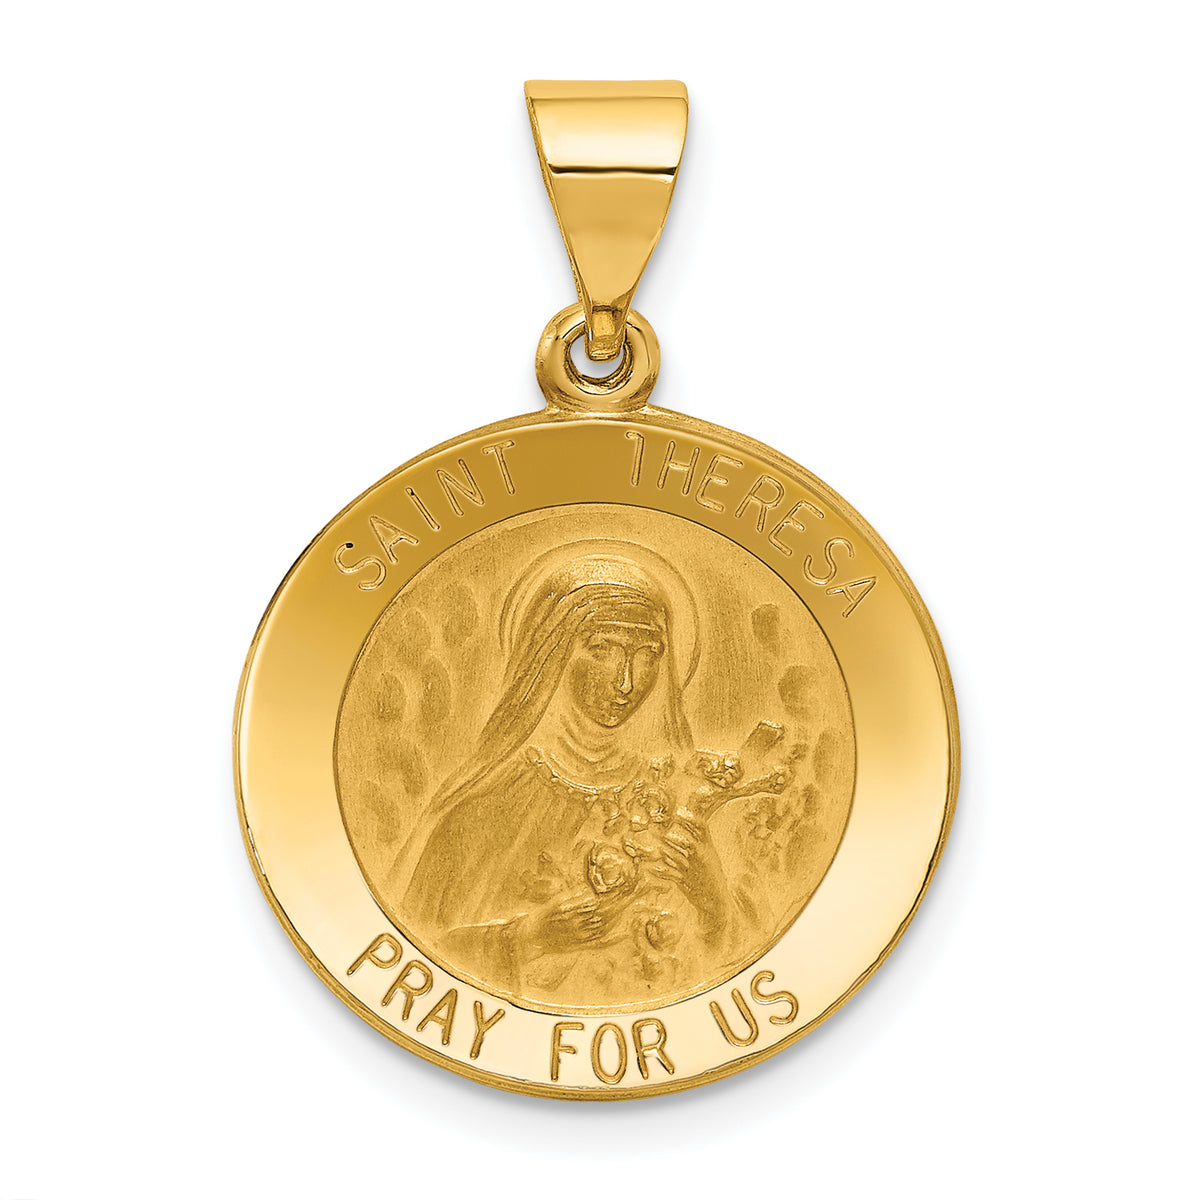 14k Polished and Satin St Theresa Medal Hollow Pendant